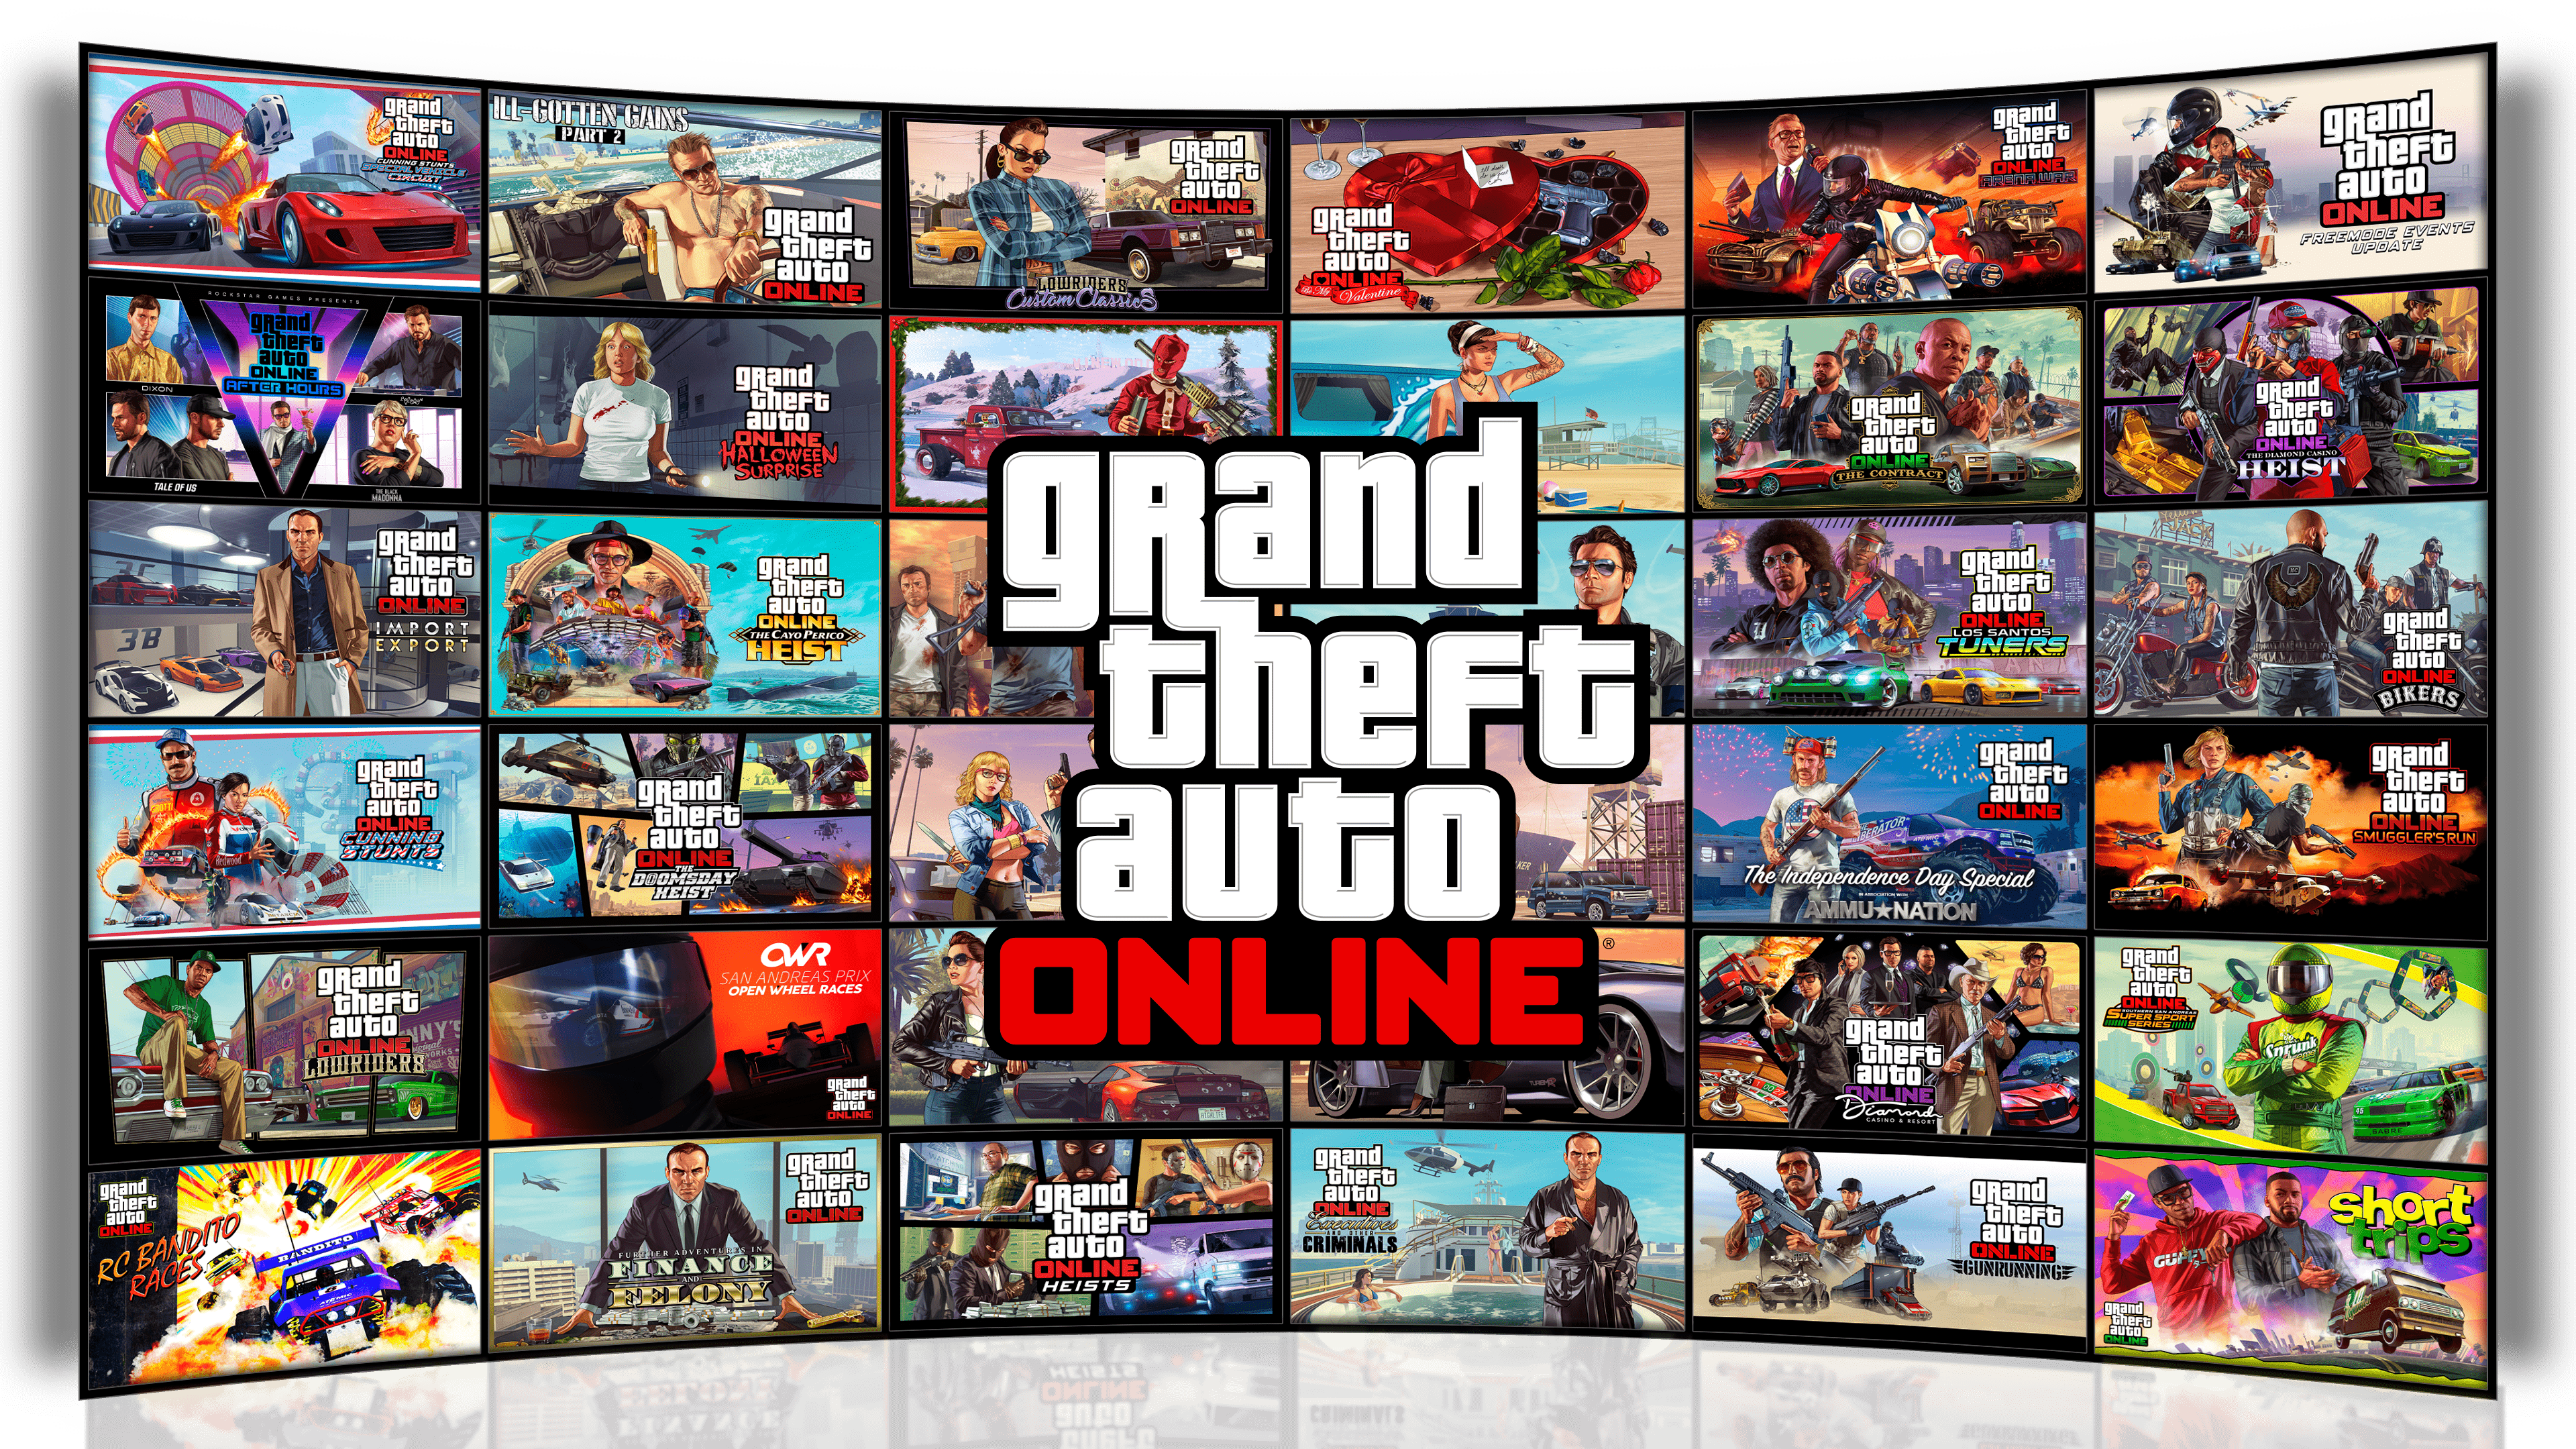 montage of artwork from GTA Online updates